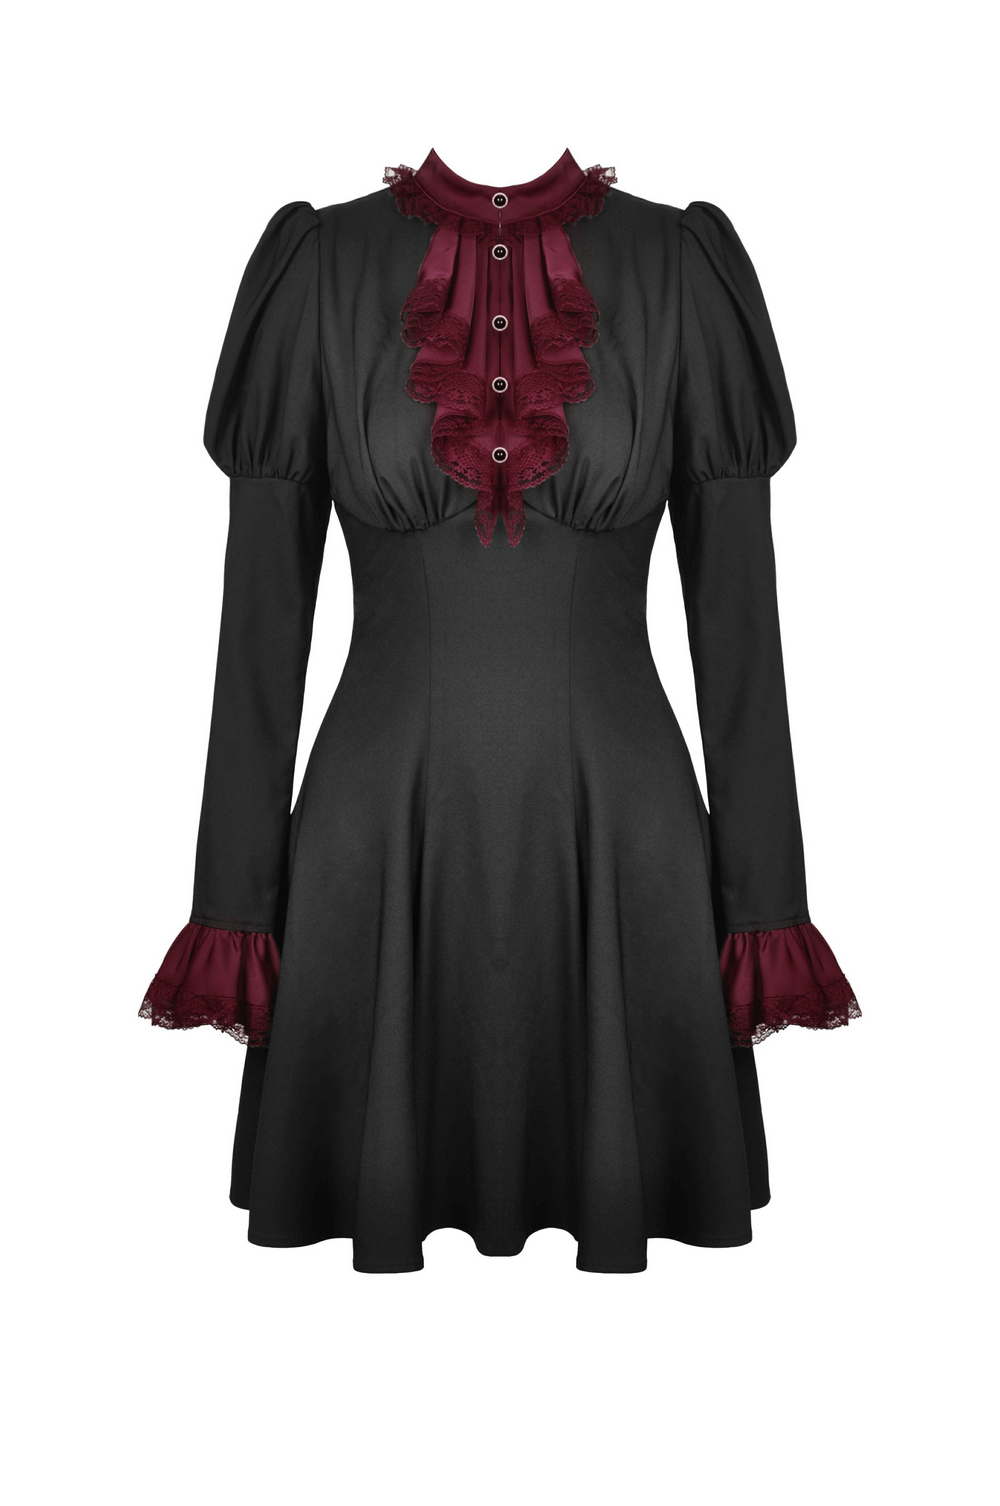 Elegant Black Dress with Burgundy Lace And Lace-Up Detail